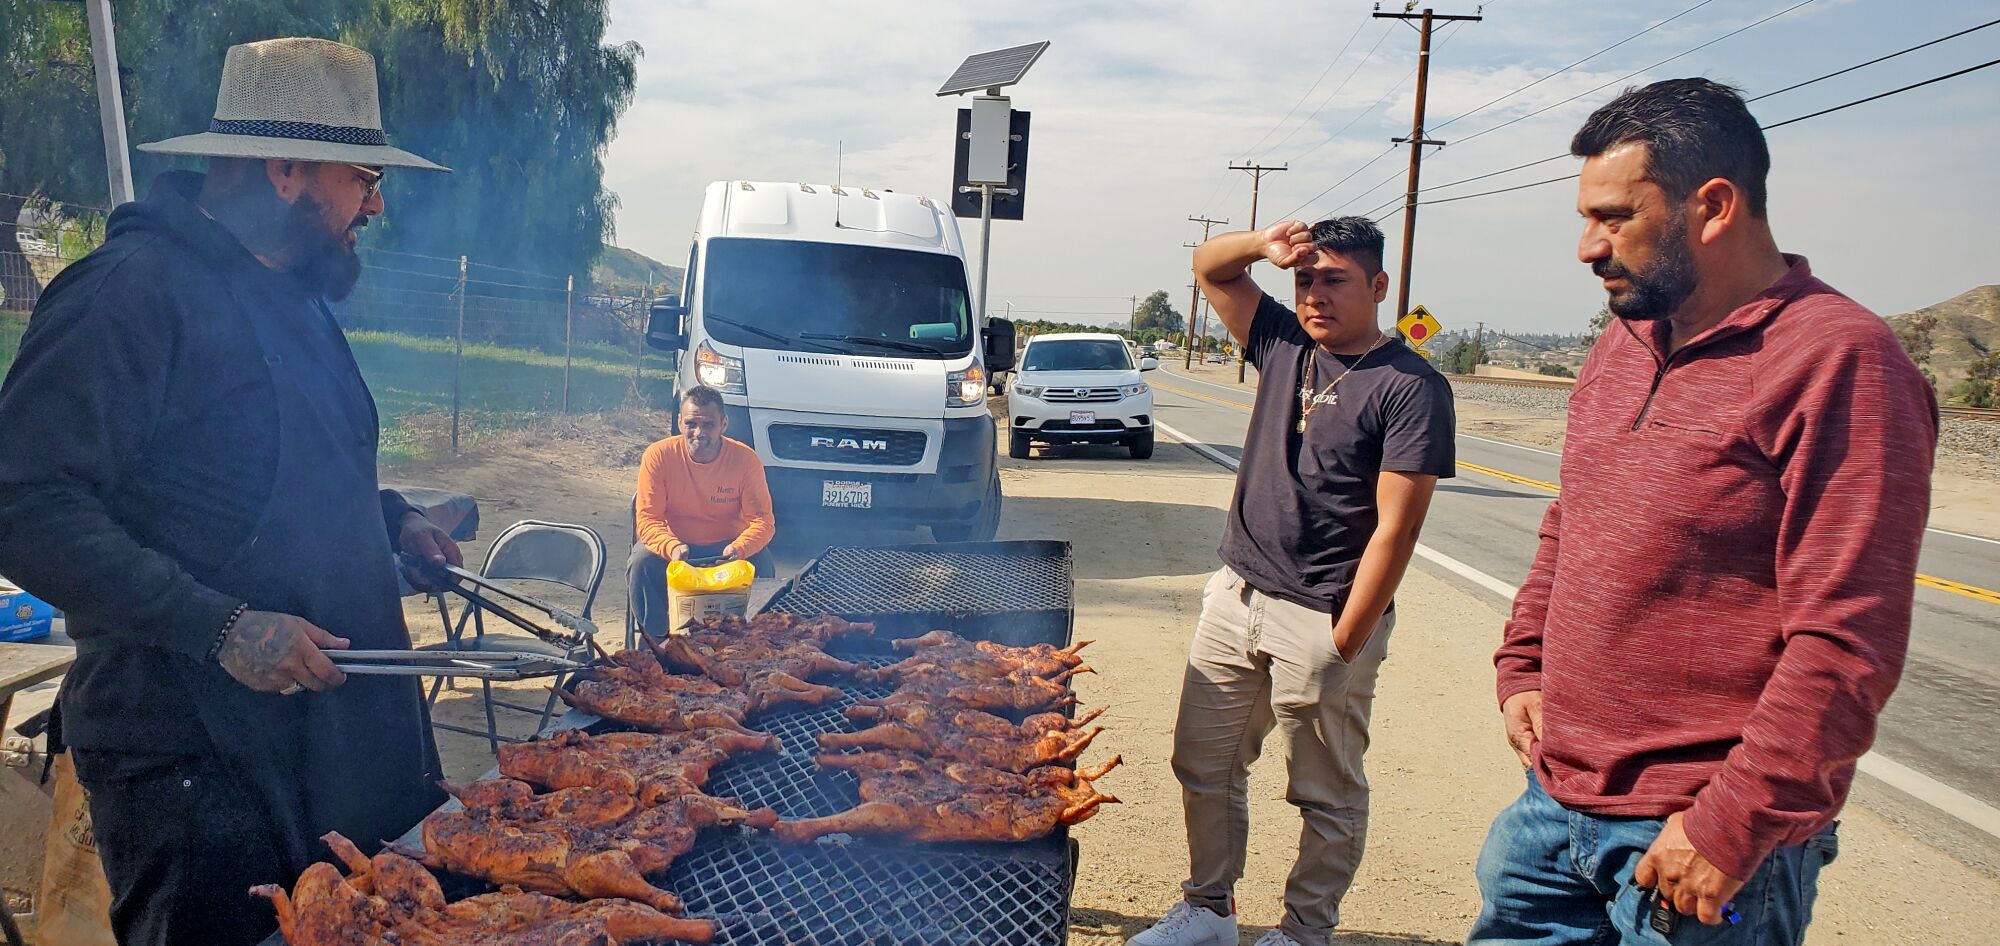 Customers watching as man grills chickens at a roadside stand 